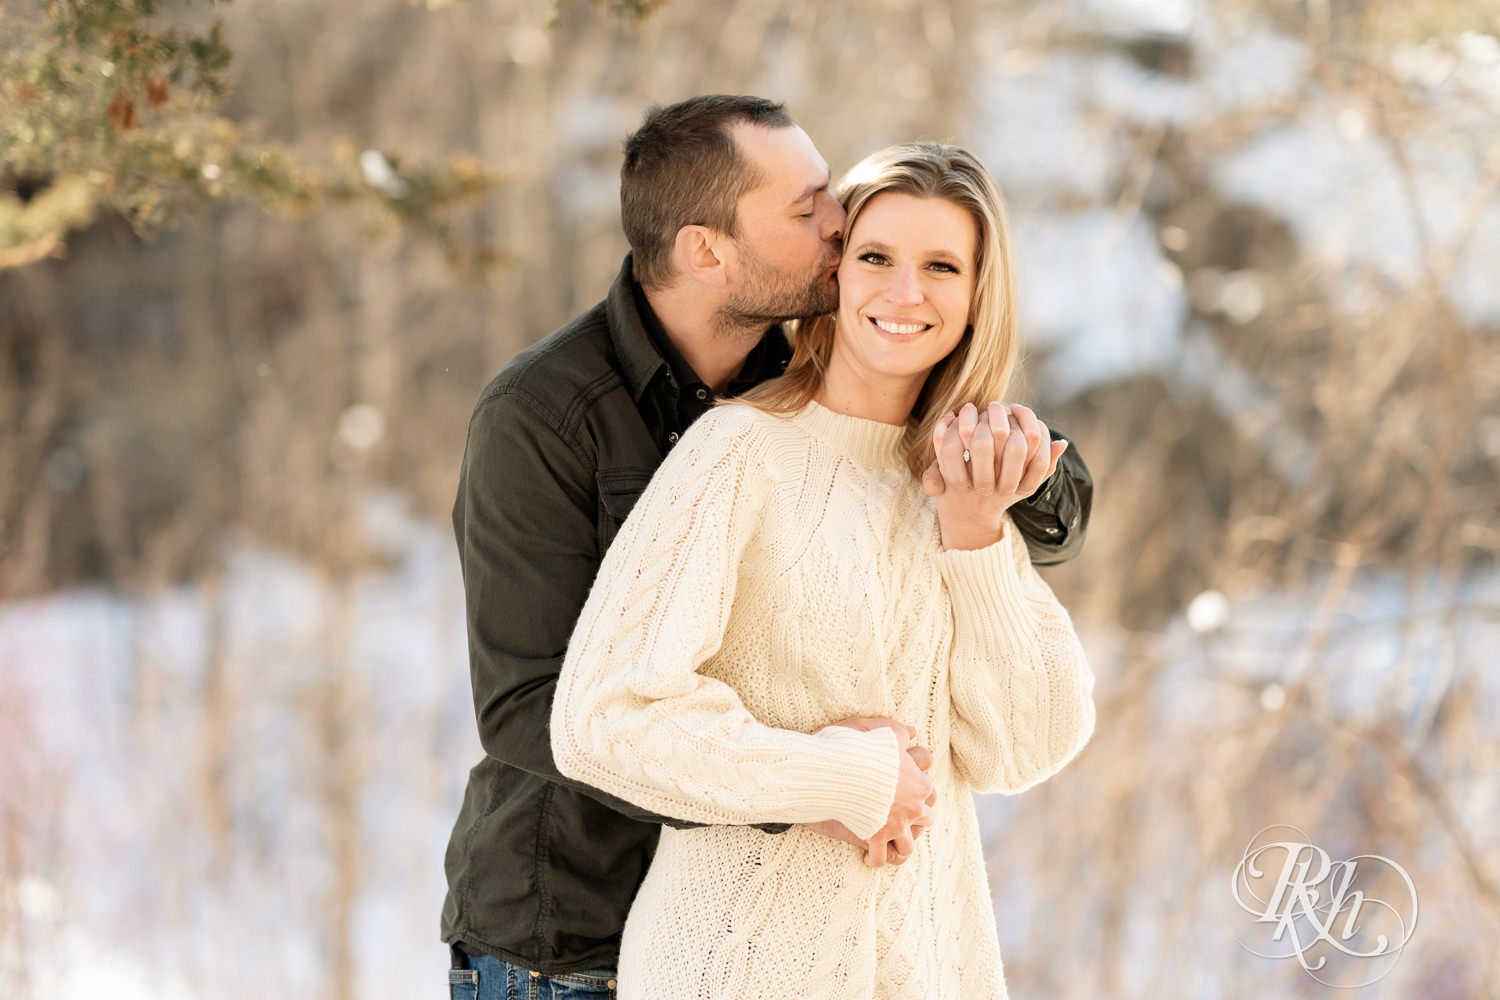 Man in jeans and green shirt and woman in a white sweater kiss in the snow at sunrise during Taylor's Falls engagement photography session.